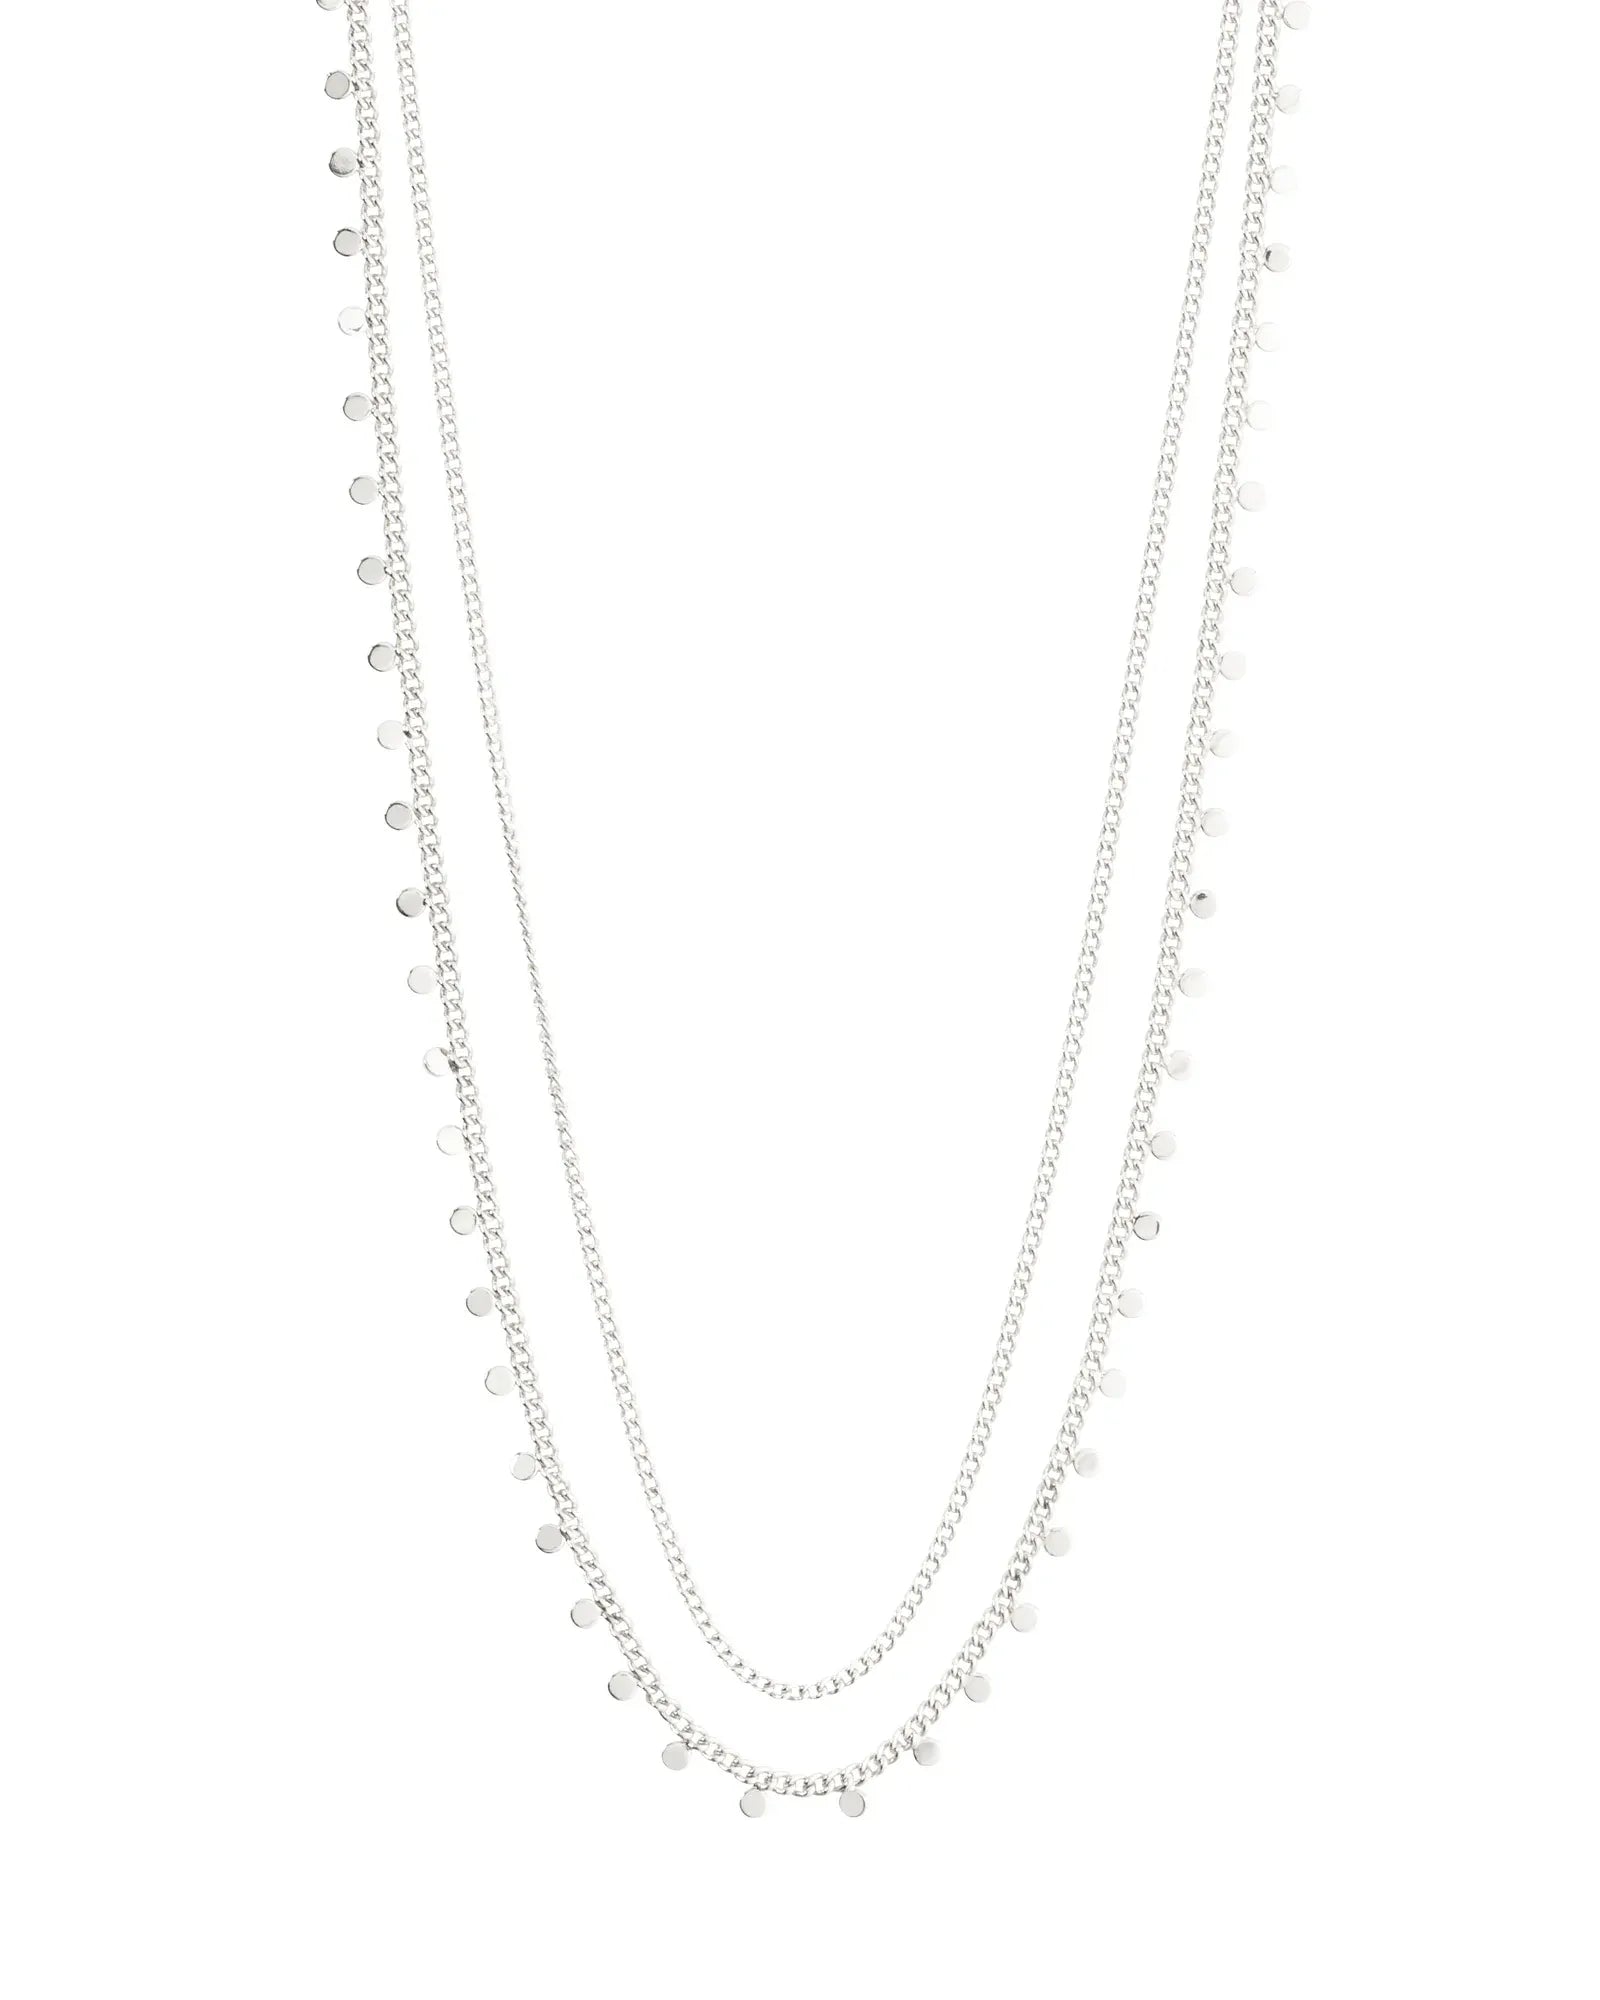 BLOOM Recycled Necklace 2-in-1 - Silver Plated